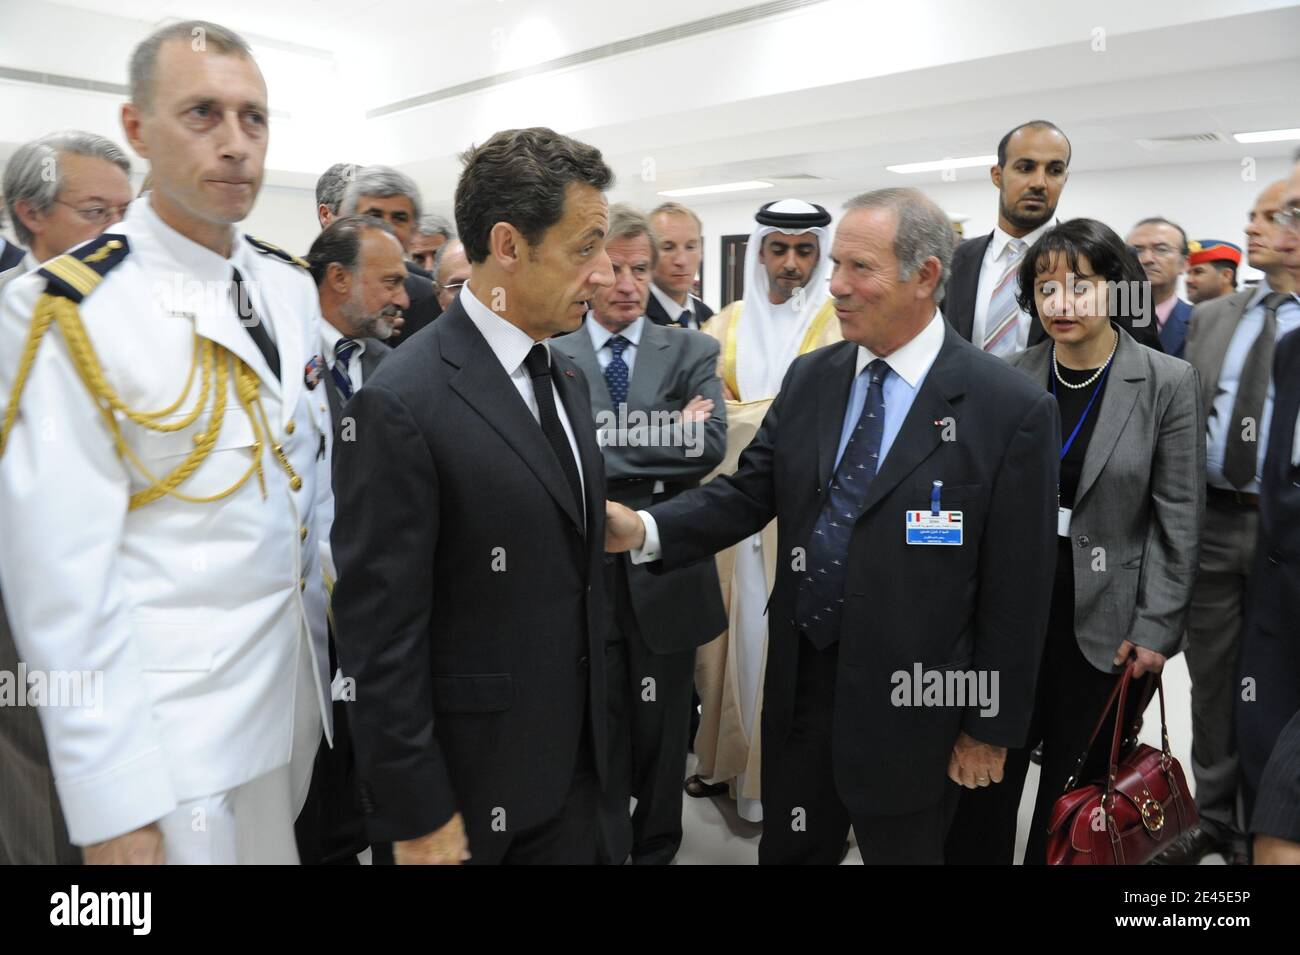 French president Nicolas Sarkozy officially inaugurates 'As Salam' French  military navy base, in Abu Dhabi, United Arab Emirates, on May 26, 2009. It  is the first French military base built since the